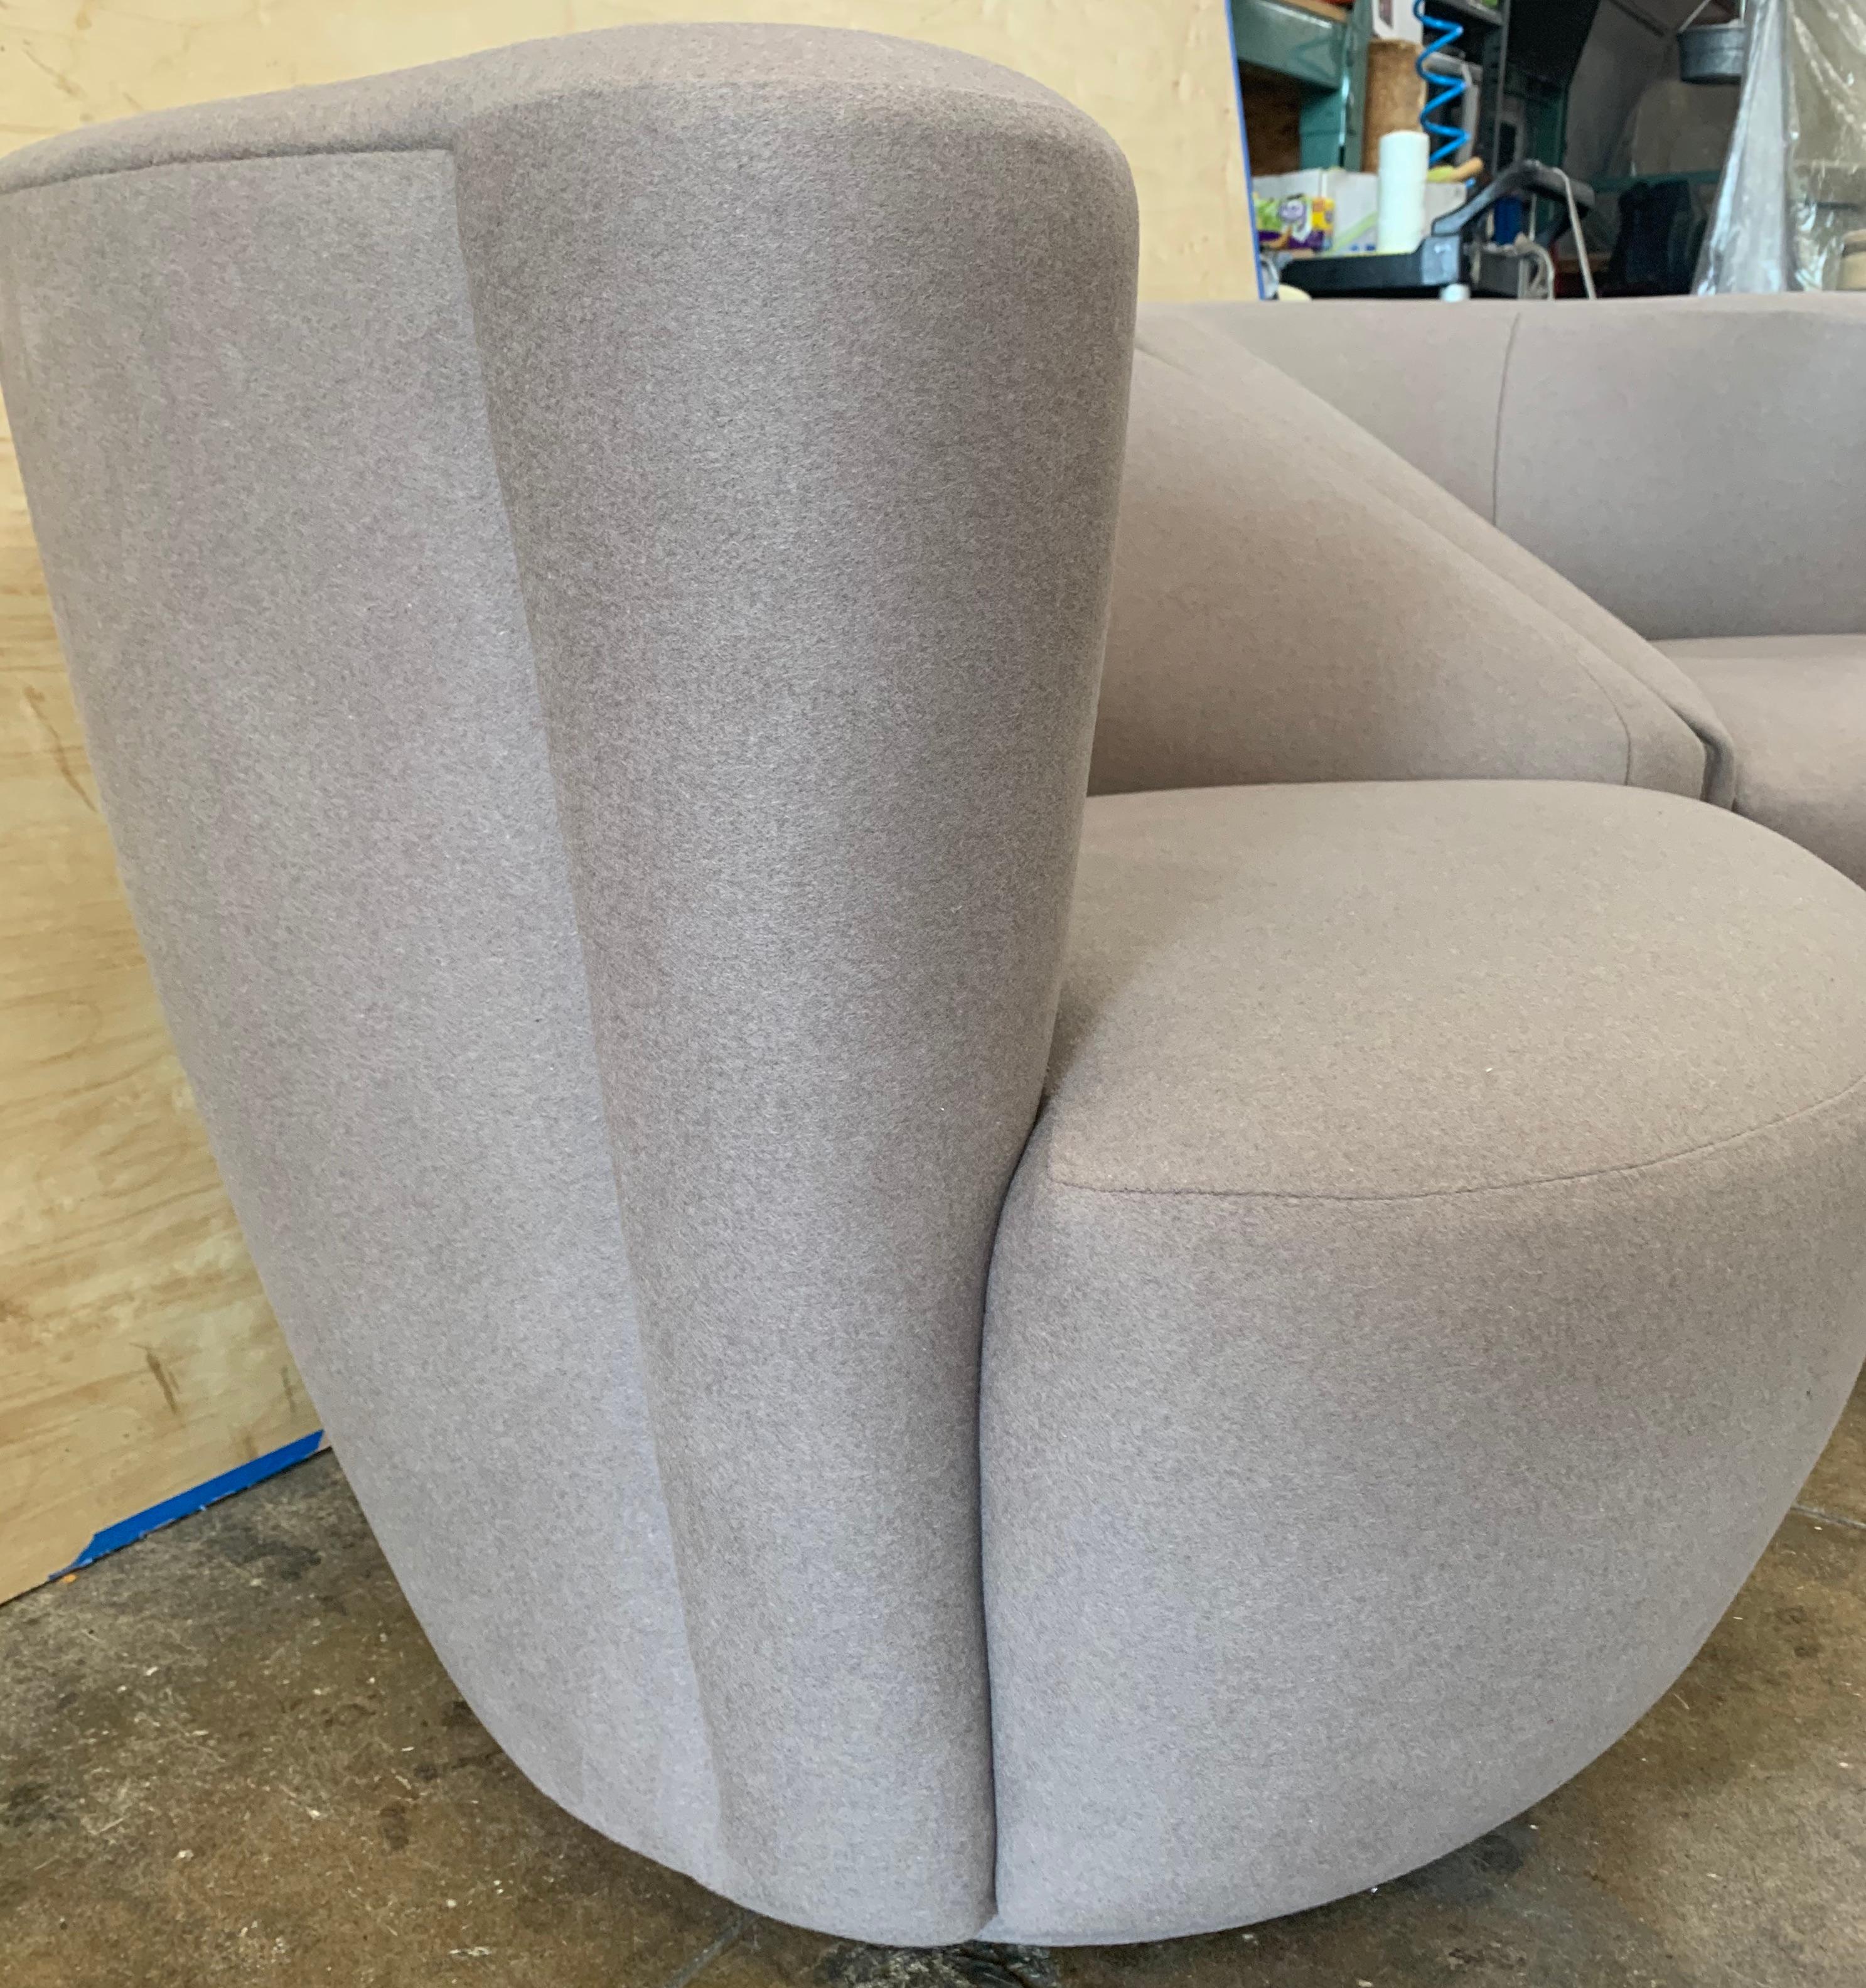 Pair of Swivel Parlor Chairs Upholstered in Light Grey Wool In Good Condition For Sale In West Hollywood, CA